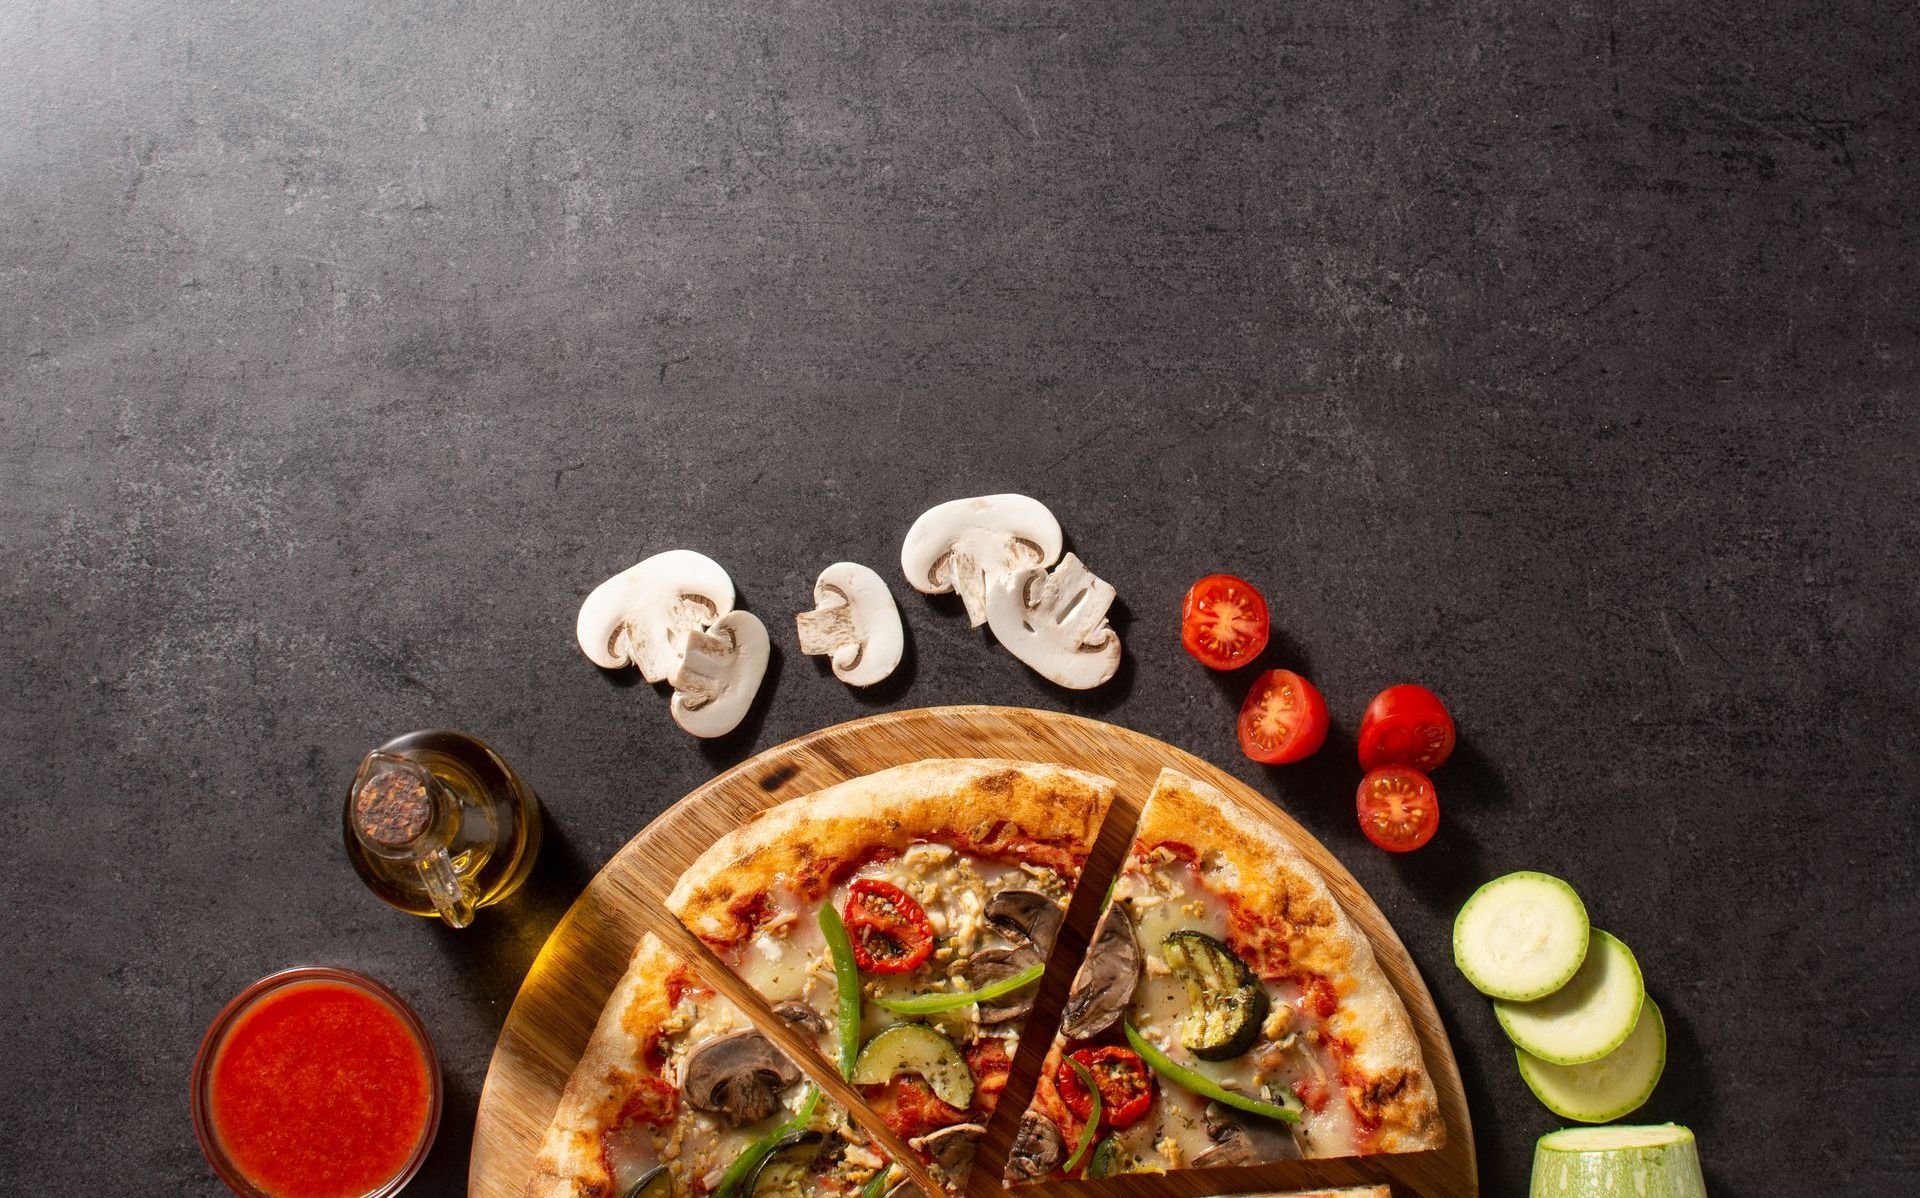 A pizza is sitting on a wooden cutting board on a table surrounded by vegetables.